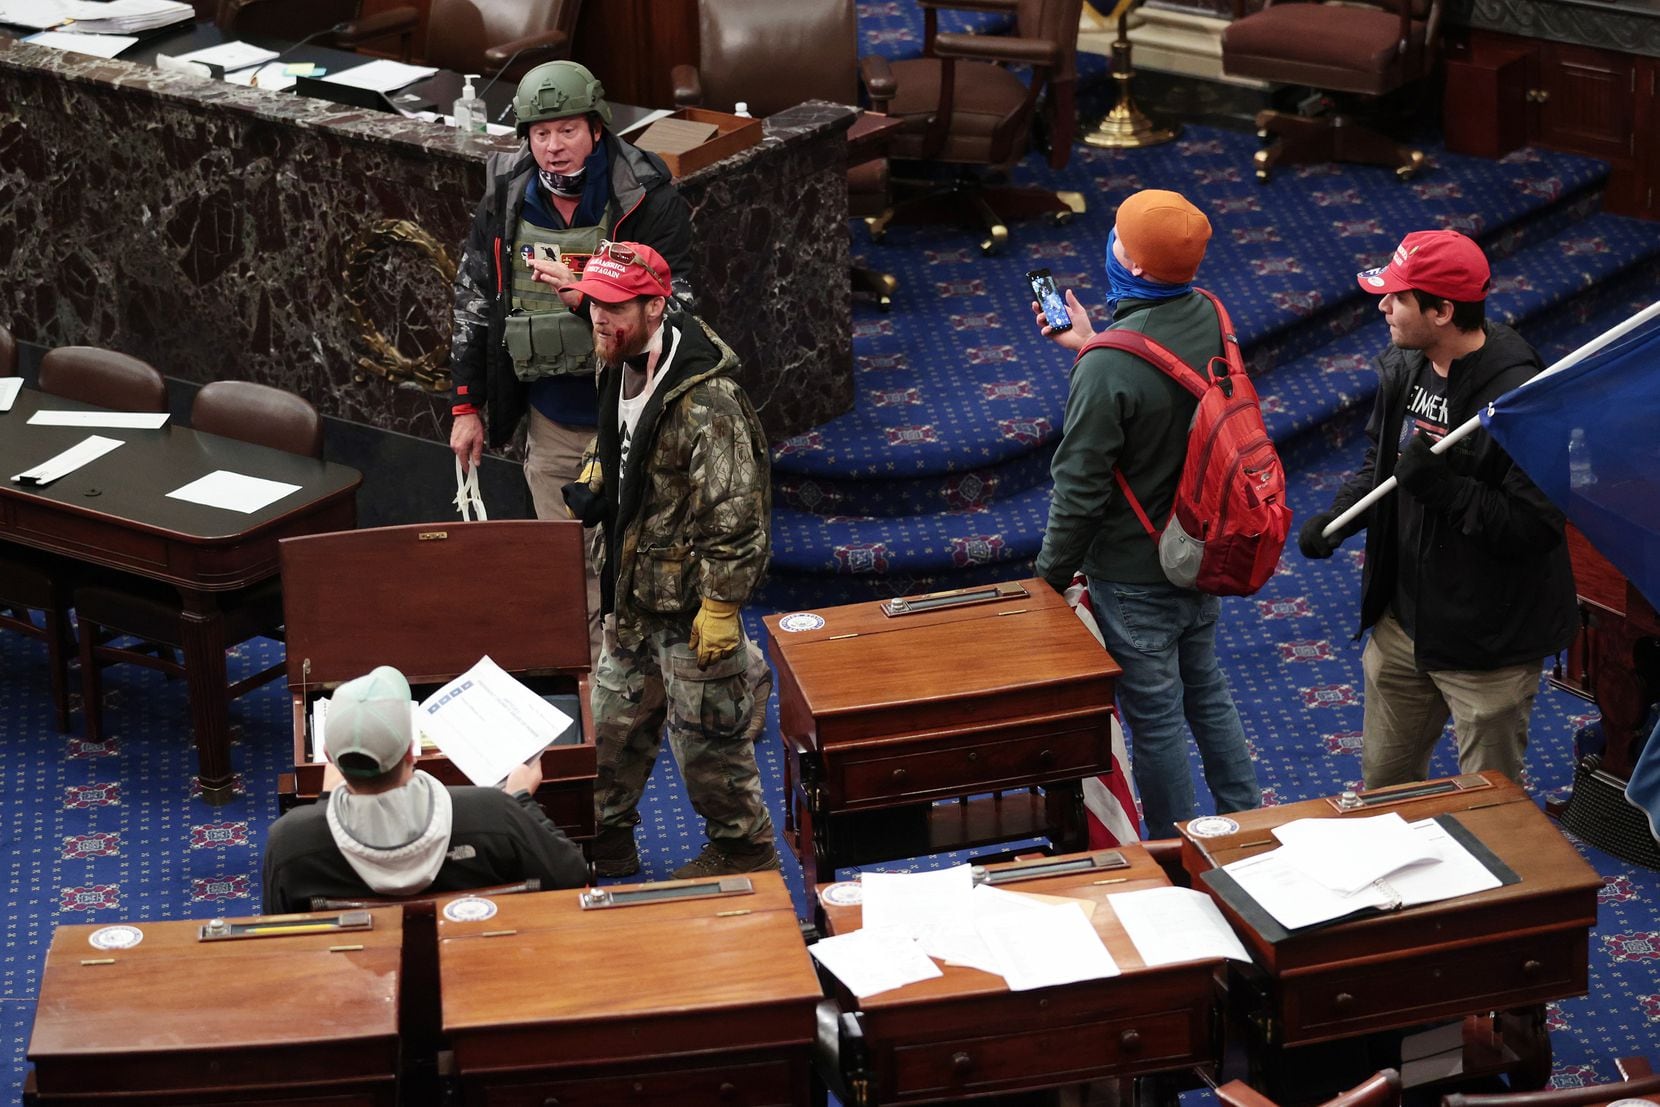 Air Force veteran Larry Brock Jr. confirmed to The New Yorker magazine that this widely circulated image from Wednesday's shocking scene in the U.S. Senate chamber shows him in the upper left, wearing combat gear.